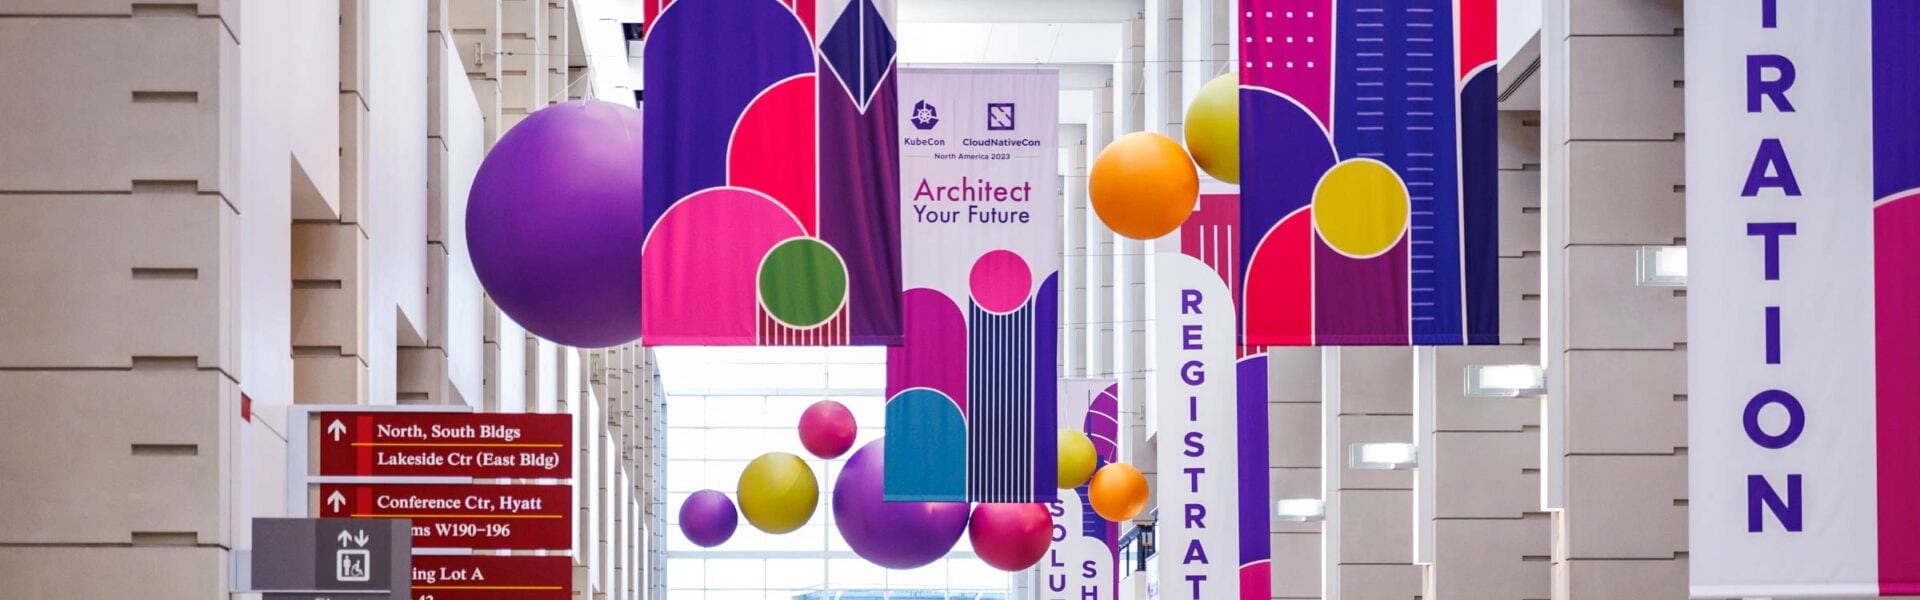 Banners & signage hanging from the walls & ceilings with colorful decorations.